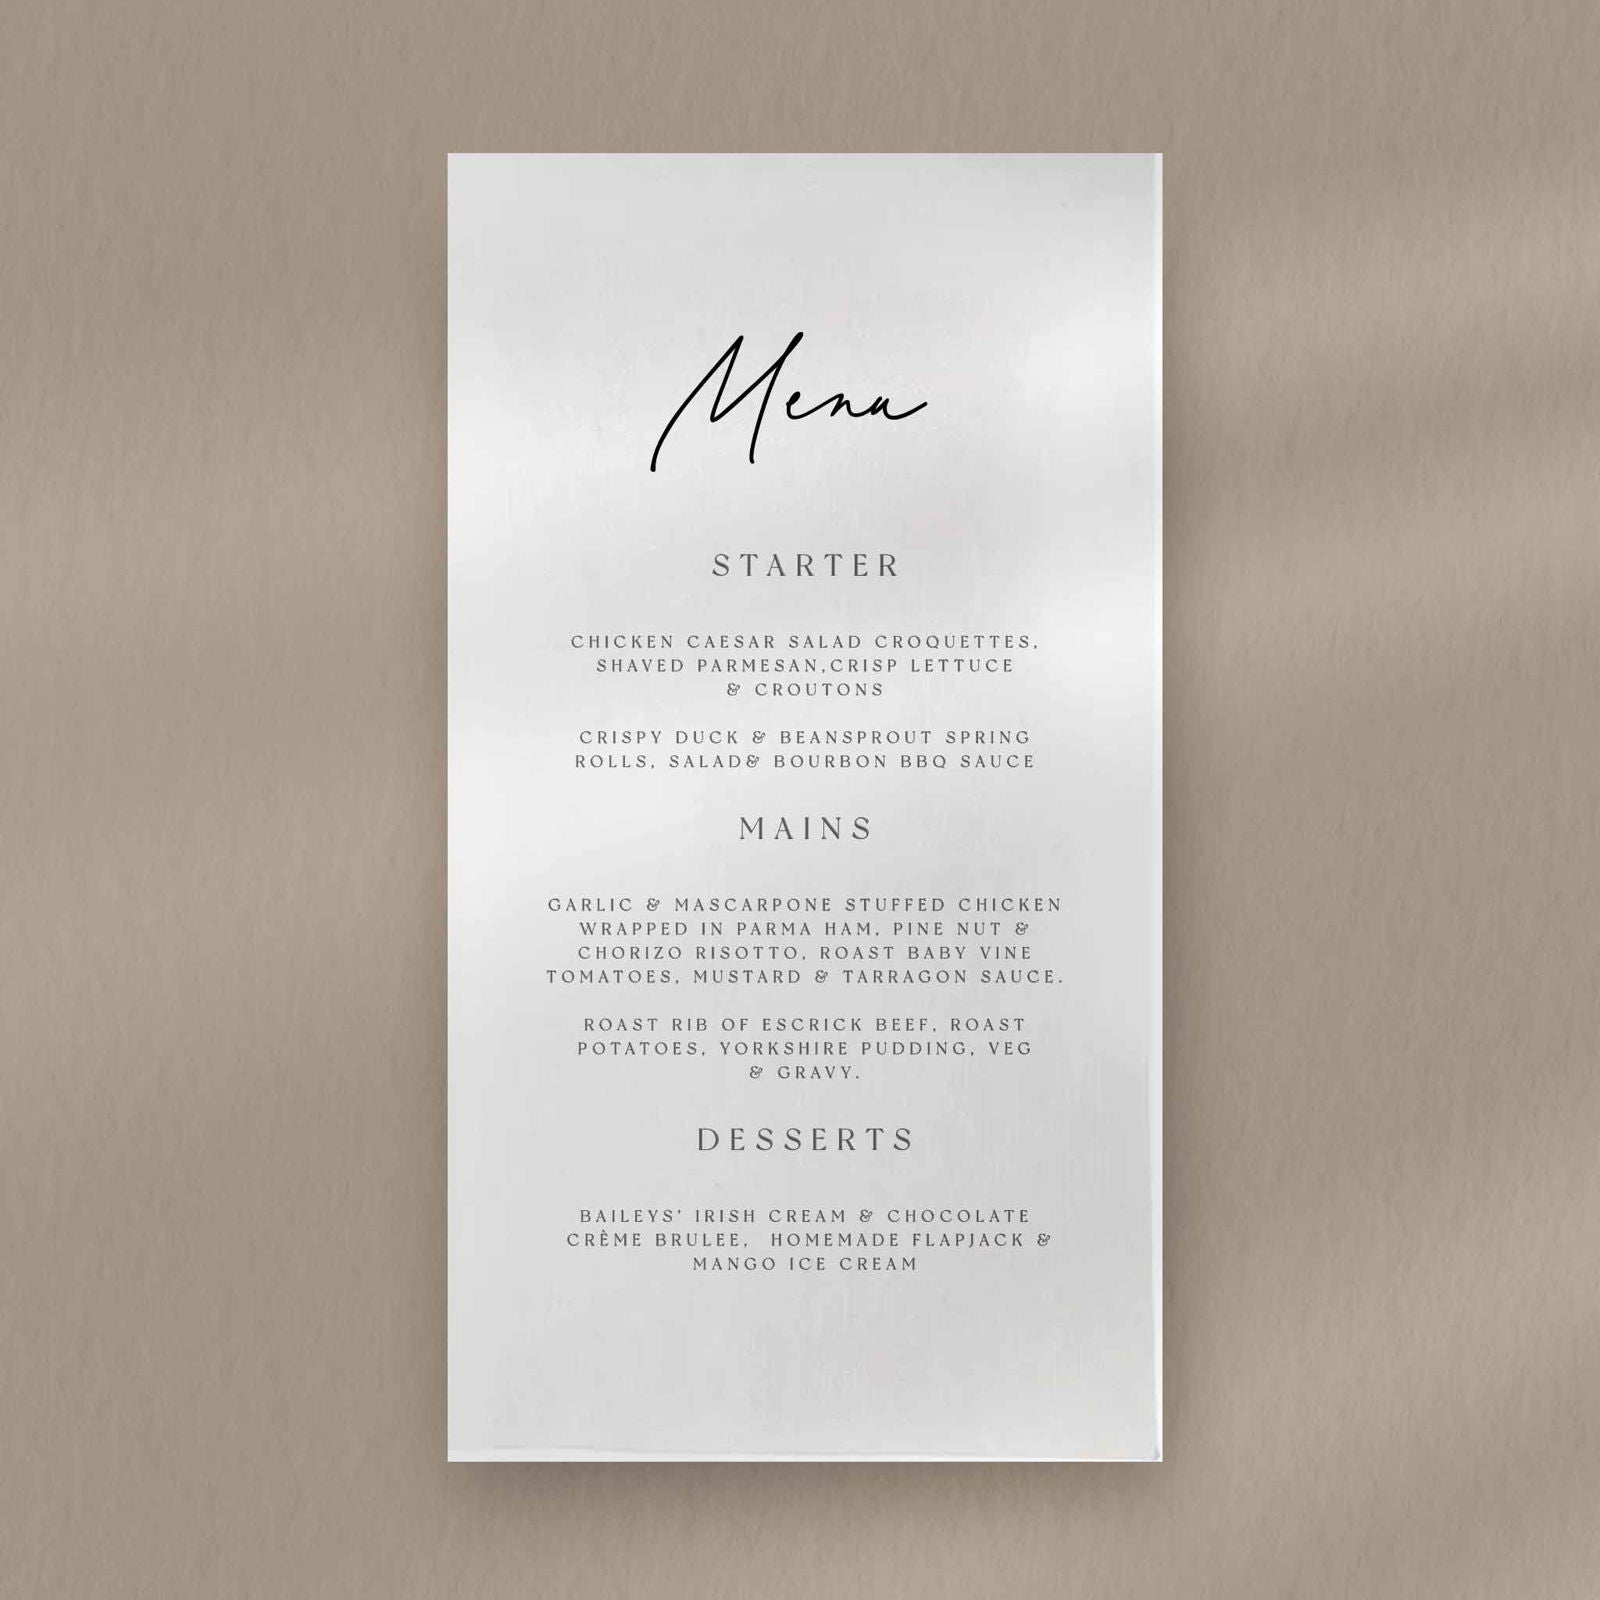 Annabelle Menu  Ivy and Gold Wedding Stationery   